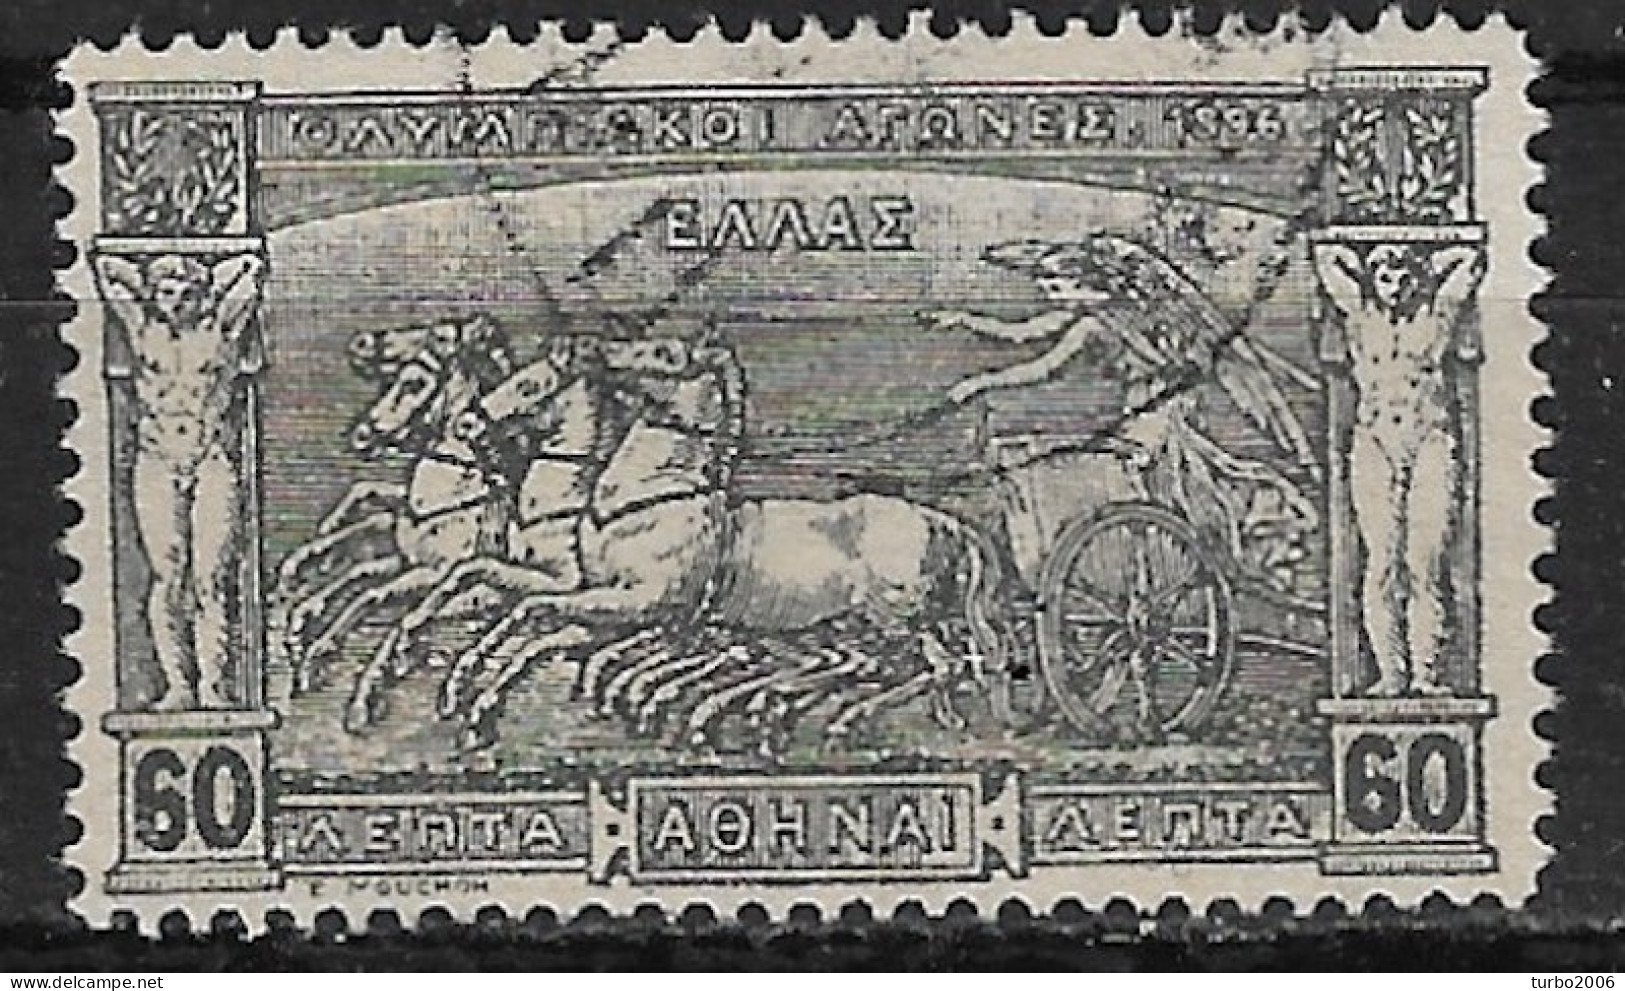 GREECE 1896 First Olympic Games 60 Lepta Black Vl. 140 Interesting Classic Forgery With Fake Cancellation ΠΑΤΡΑΙ - Oblitérés